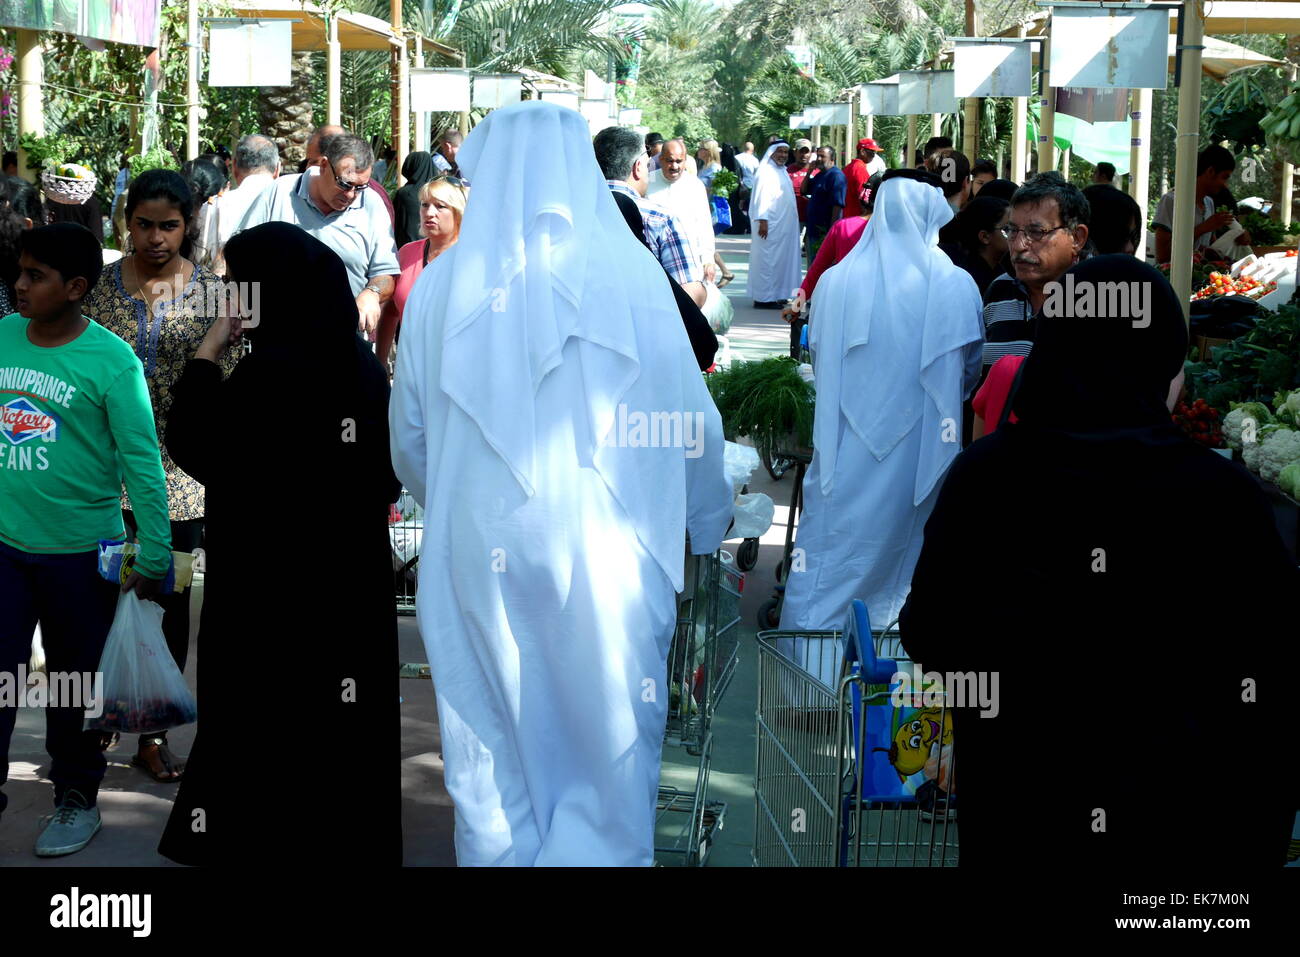 Shoppers at the farmers' market, held at the botanical garden  in Budaiya, Kingdom of Bahrain Stock Photo